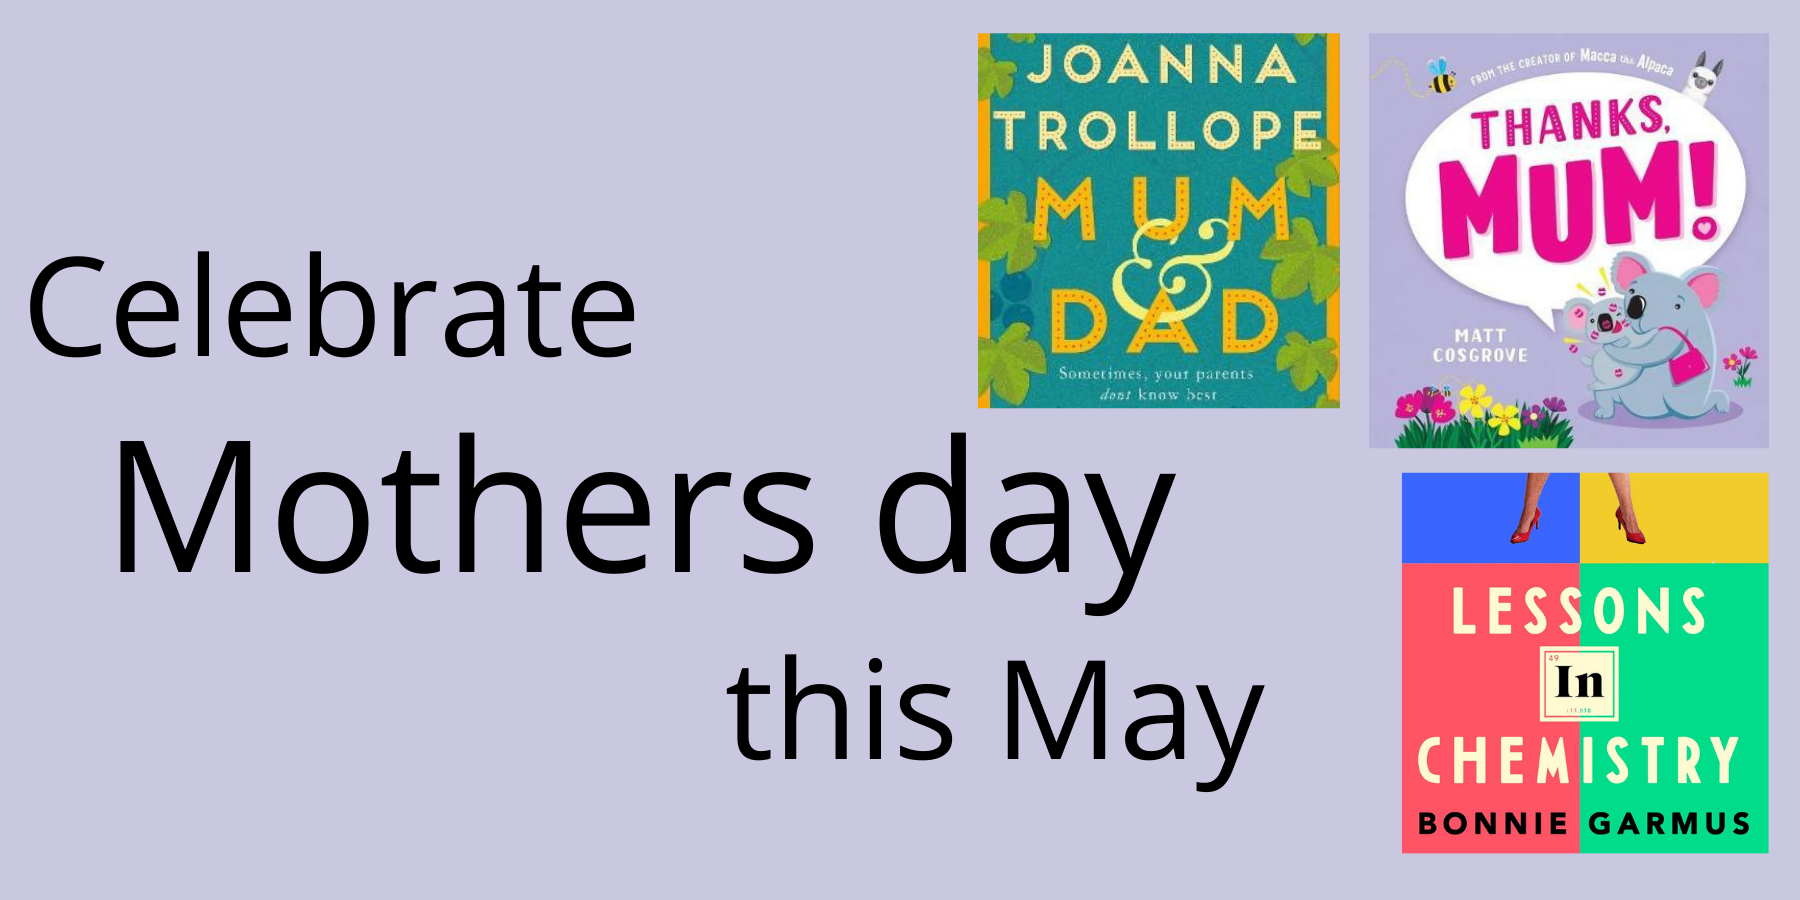 Text Celebrate mothers day and 3 book covers 